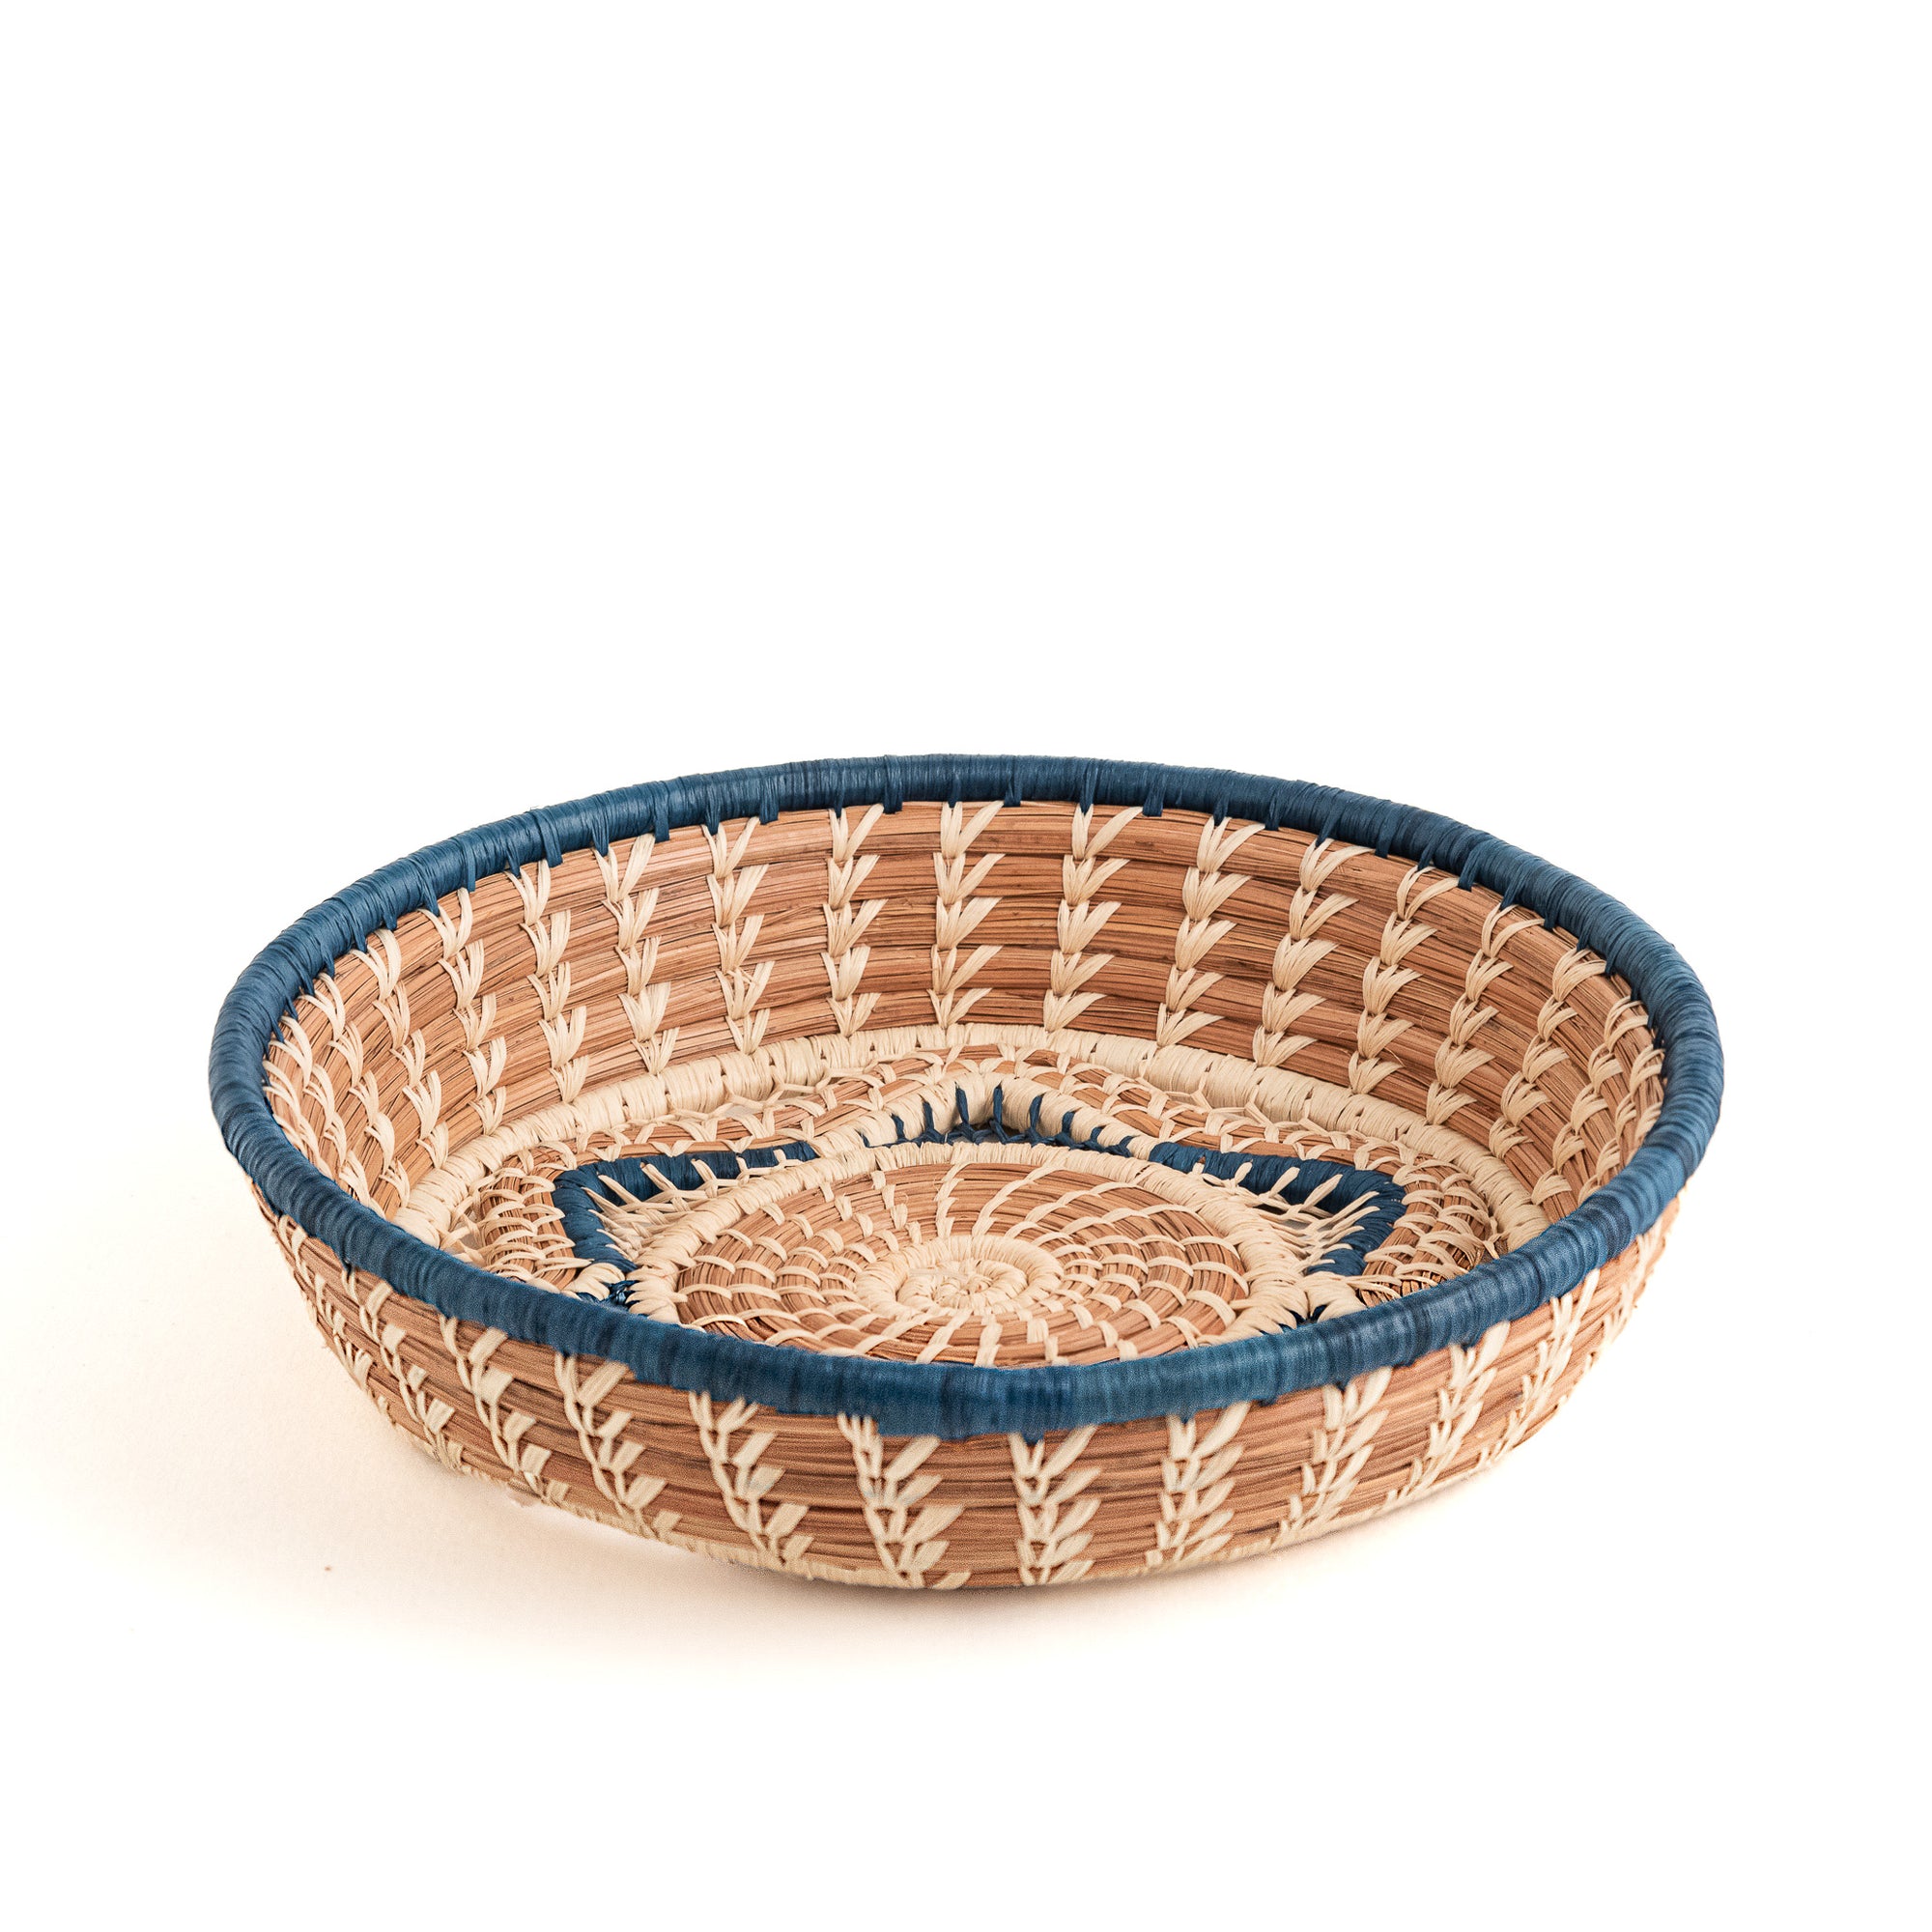 pine needle basket with star center and blue trim